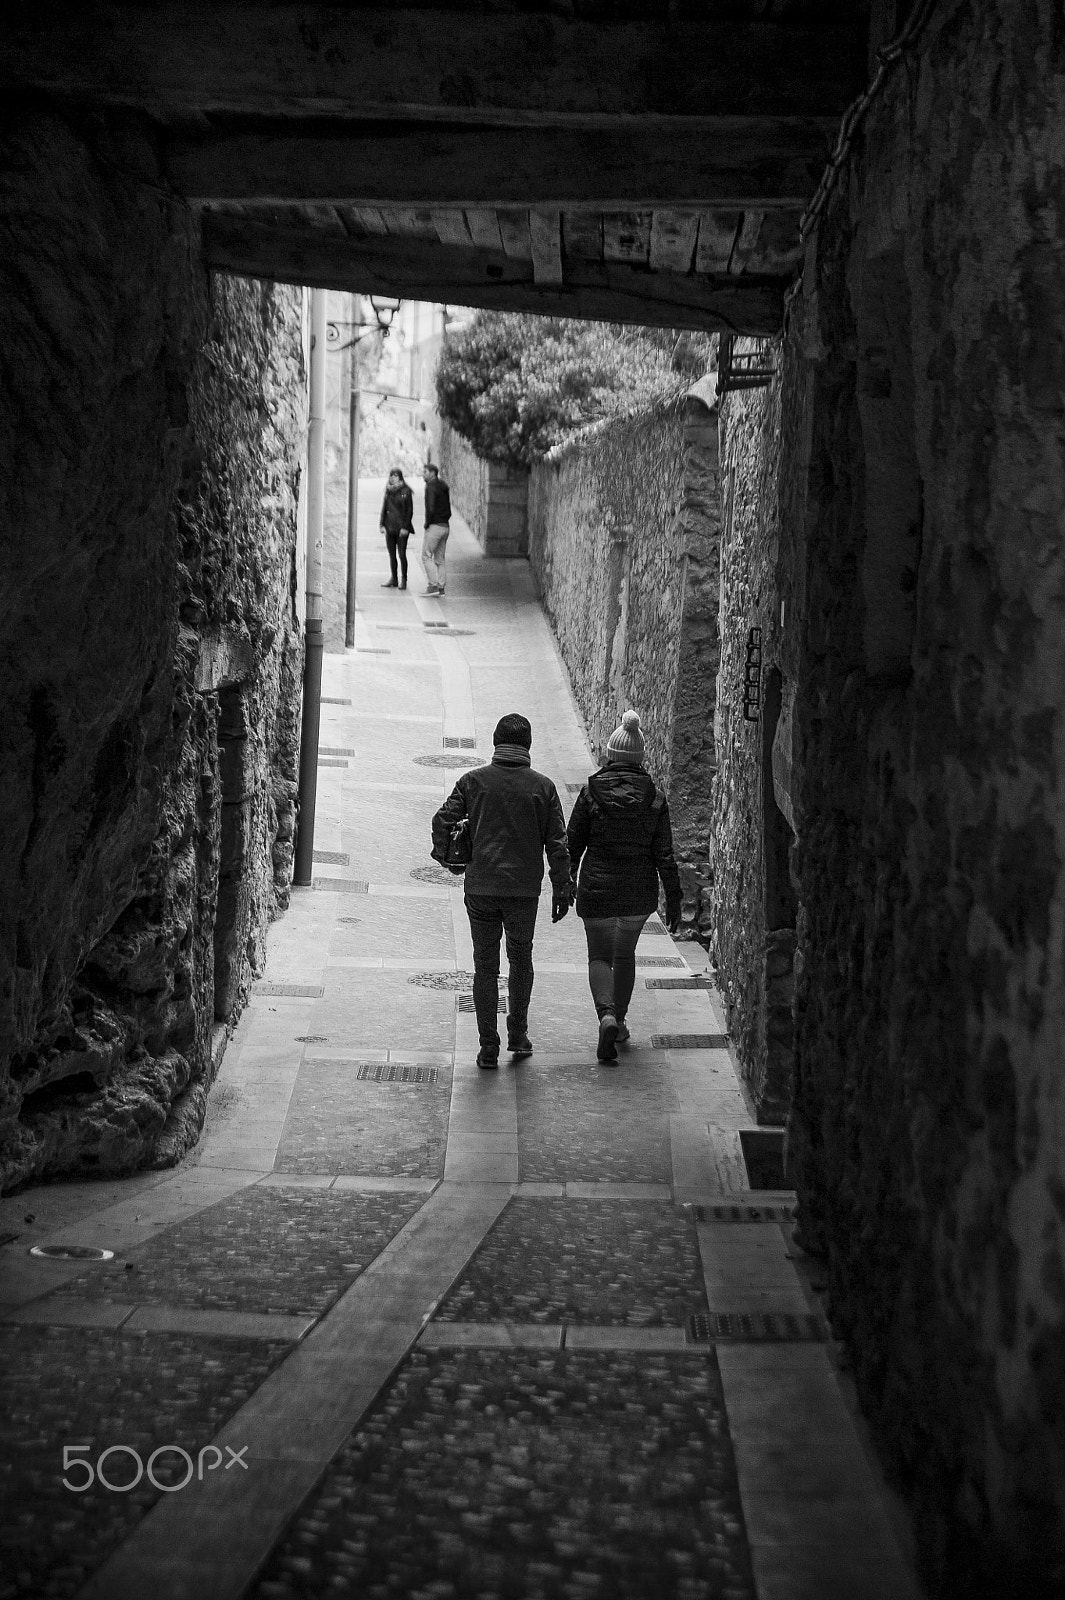 Nikon D700 sample photo. People crossing an old urban stone-walled passage photography